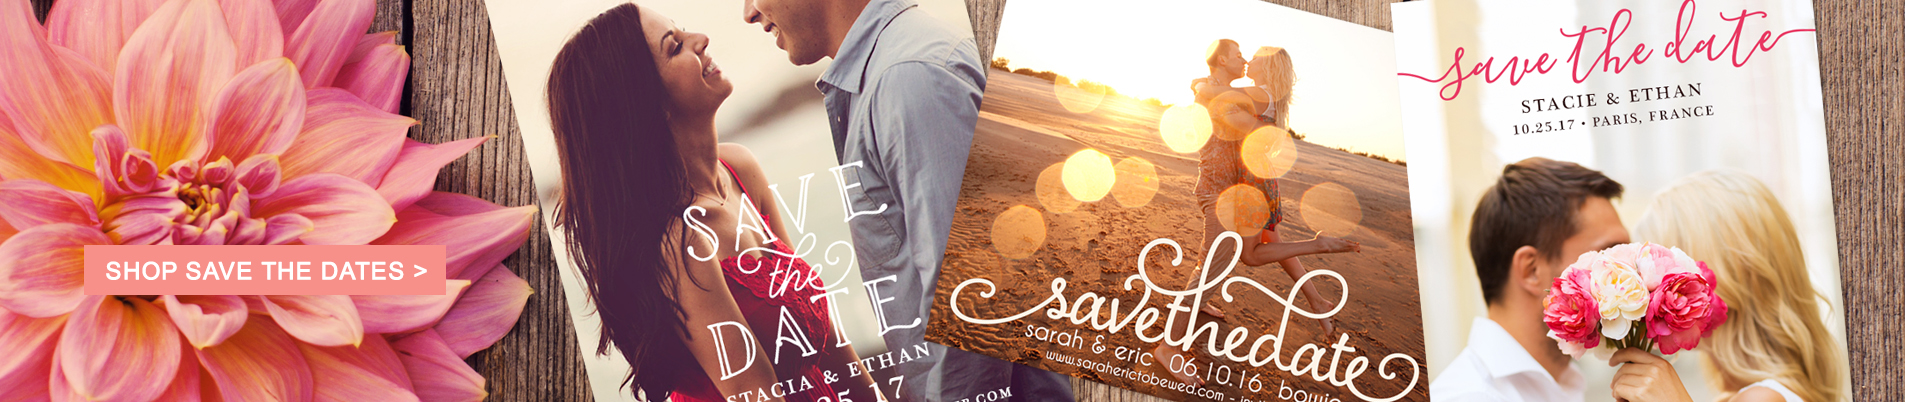 home-banner-save-the-date-1